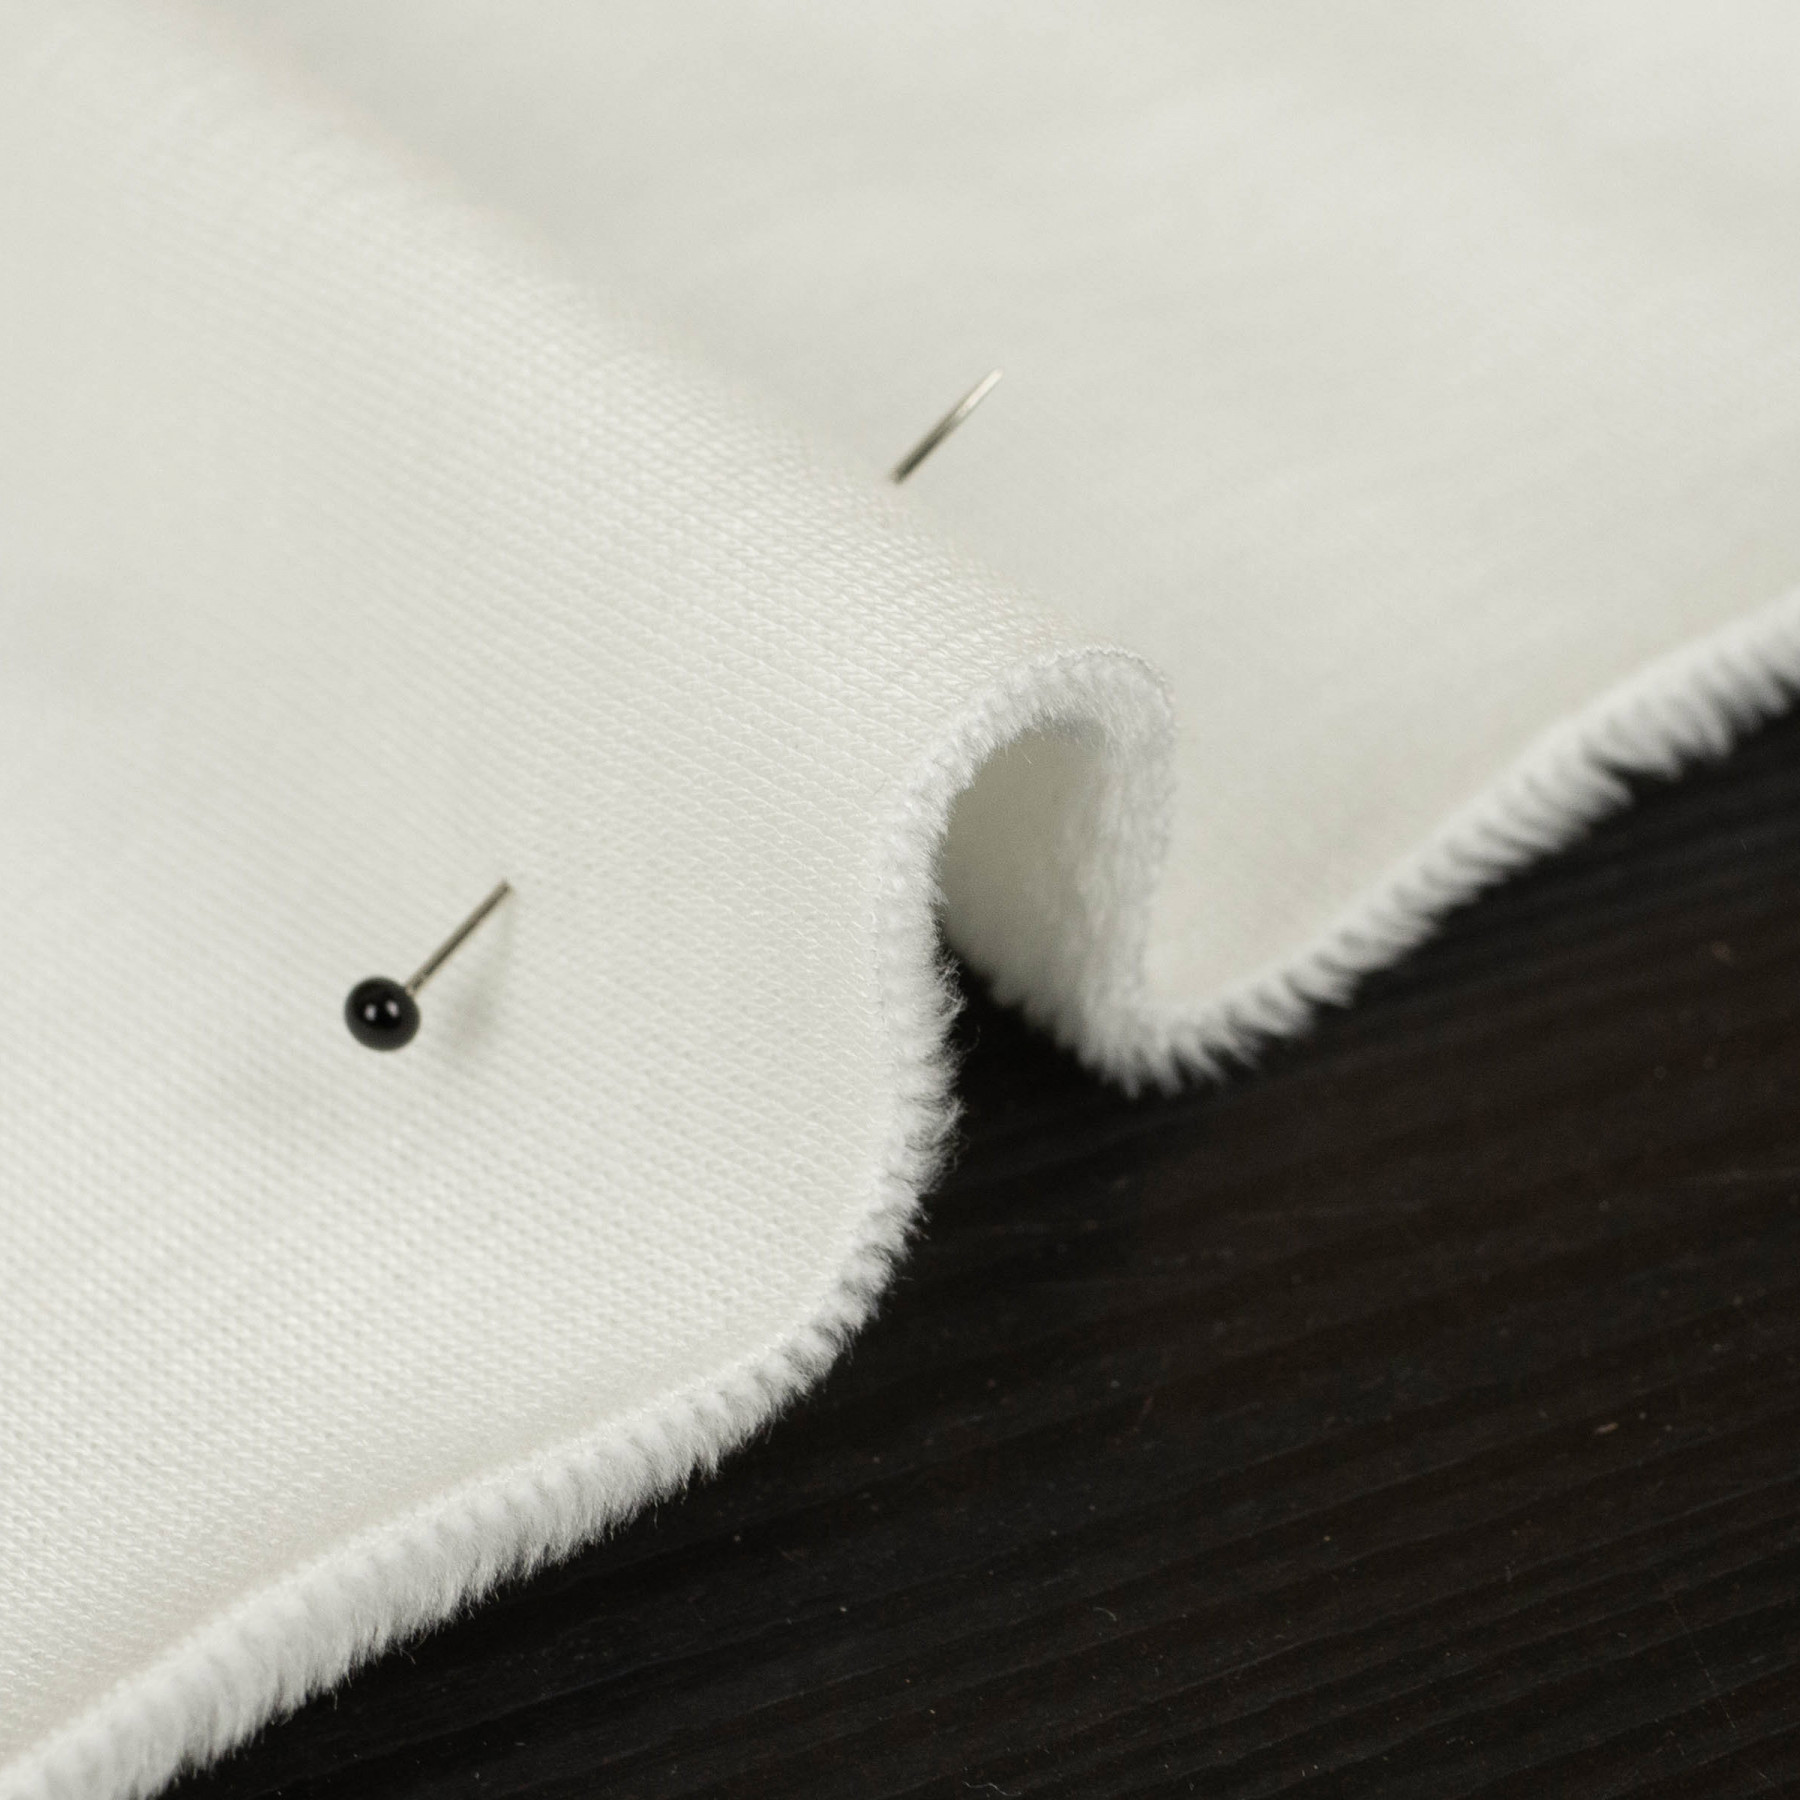 MINI LEAVES AND INSECTS PAT. 6 (TROPICAL NATURE) / white - brushed knit fabric with teddy / alpine fleece